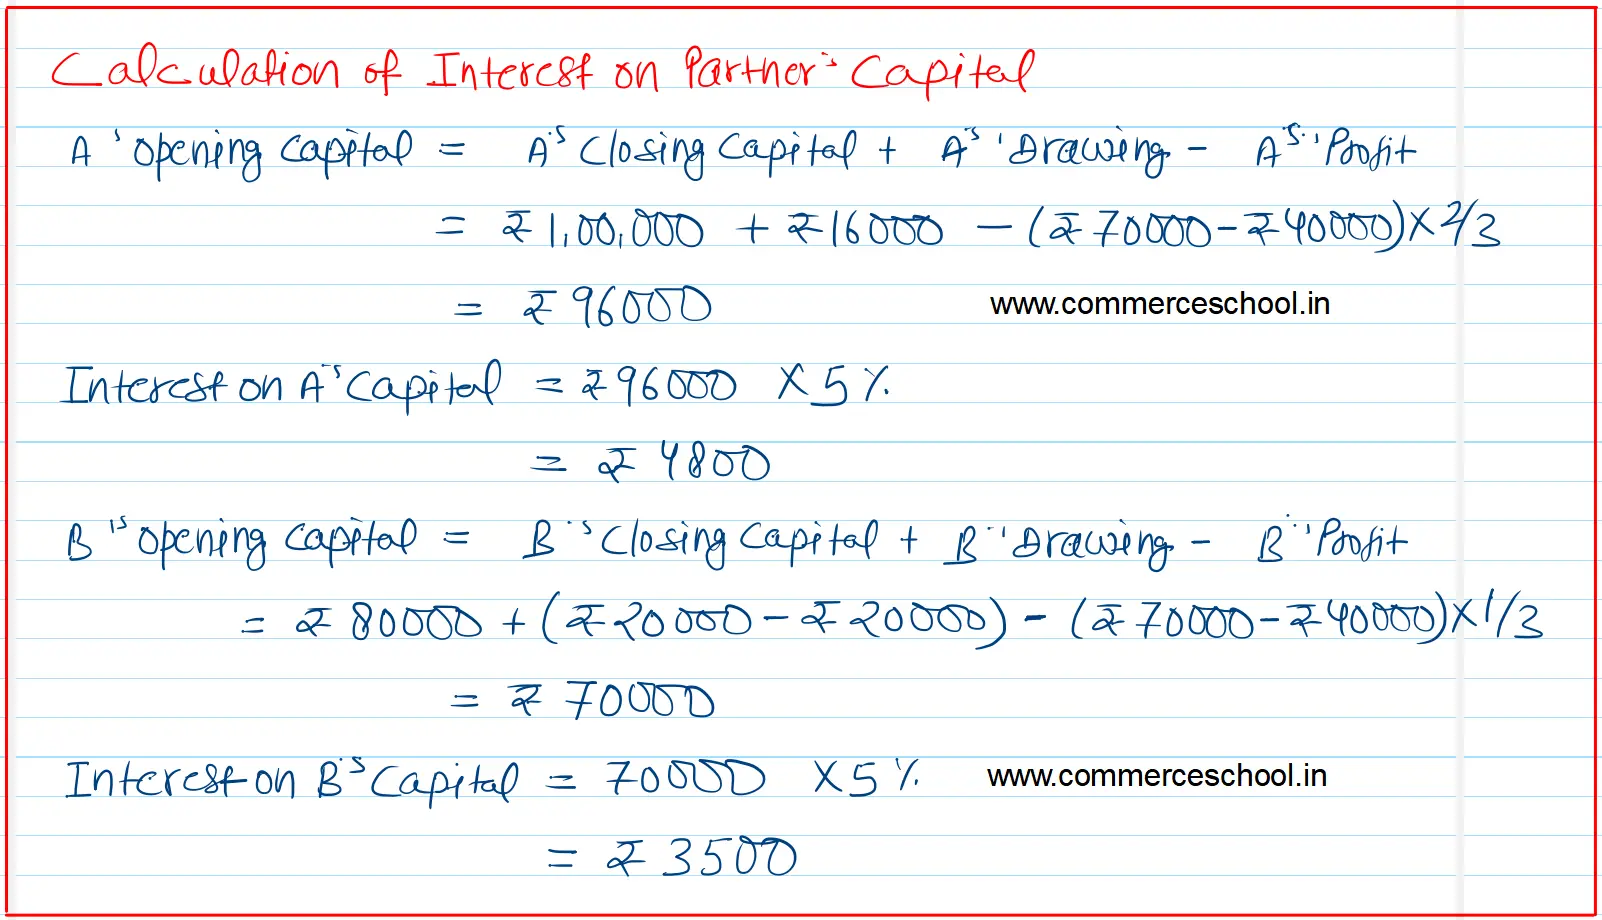 From the following Balance Sheet of A and B, calculate interest on capital at 5% p.a. for the year ending 31st March